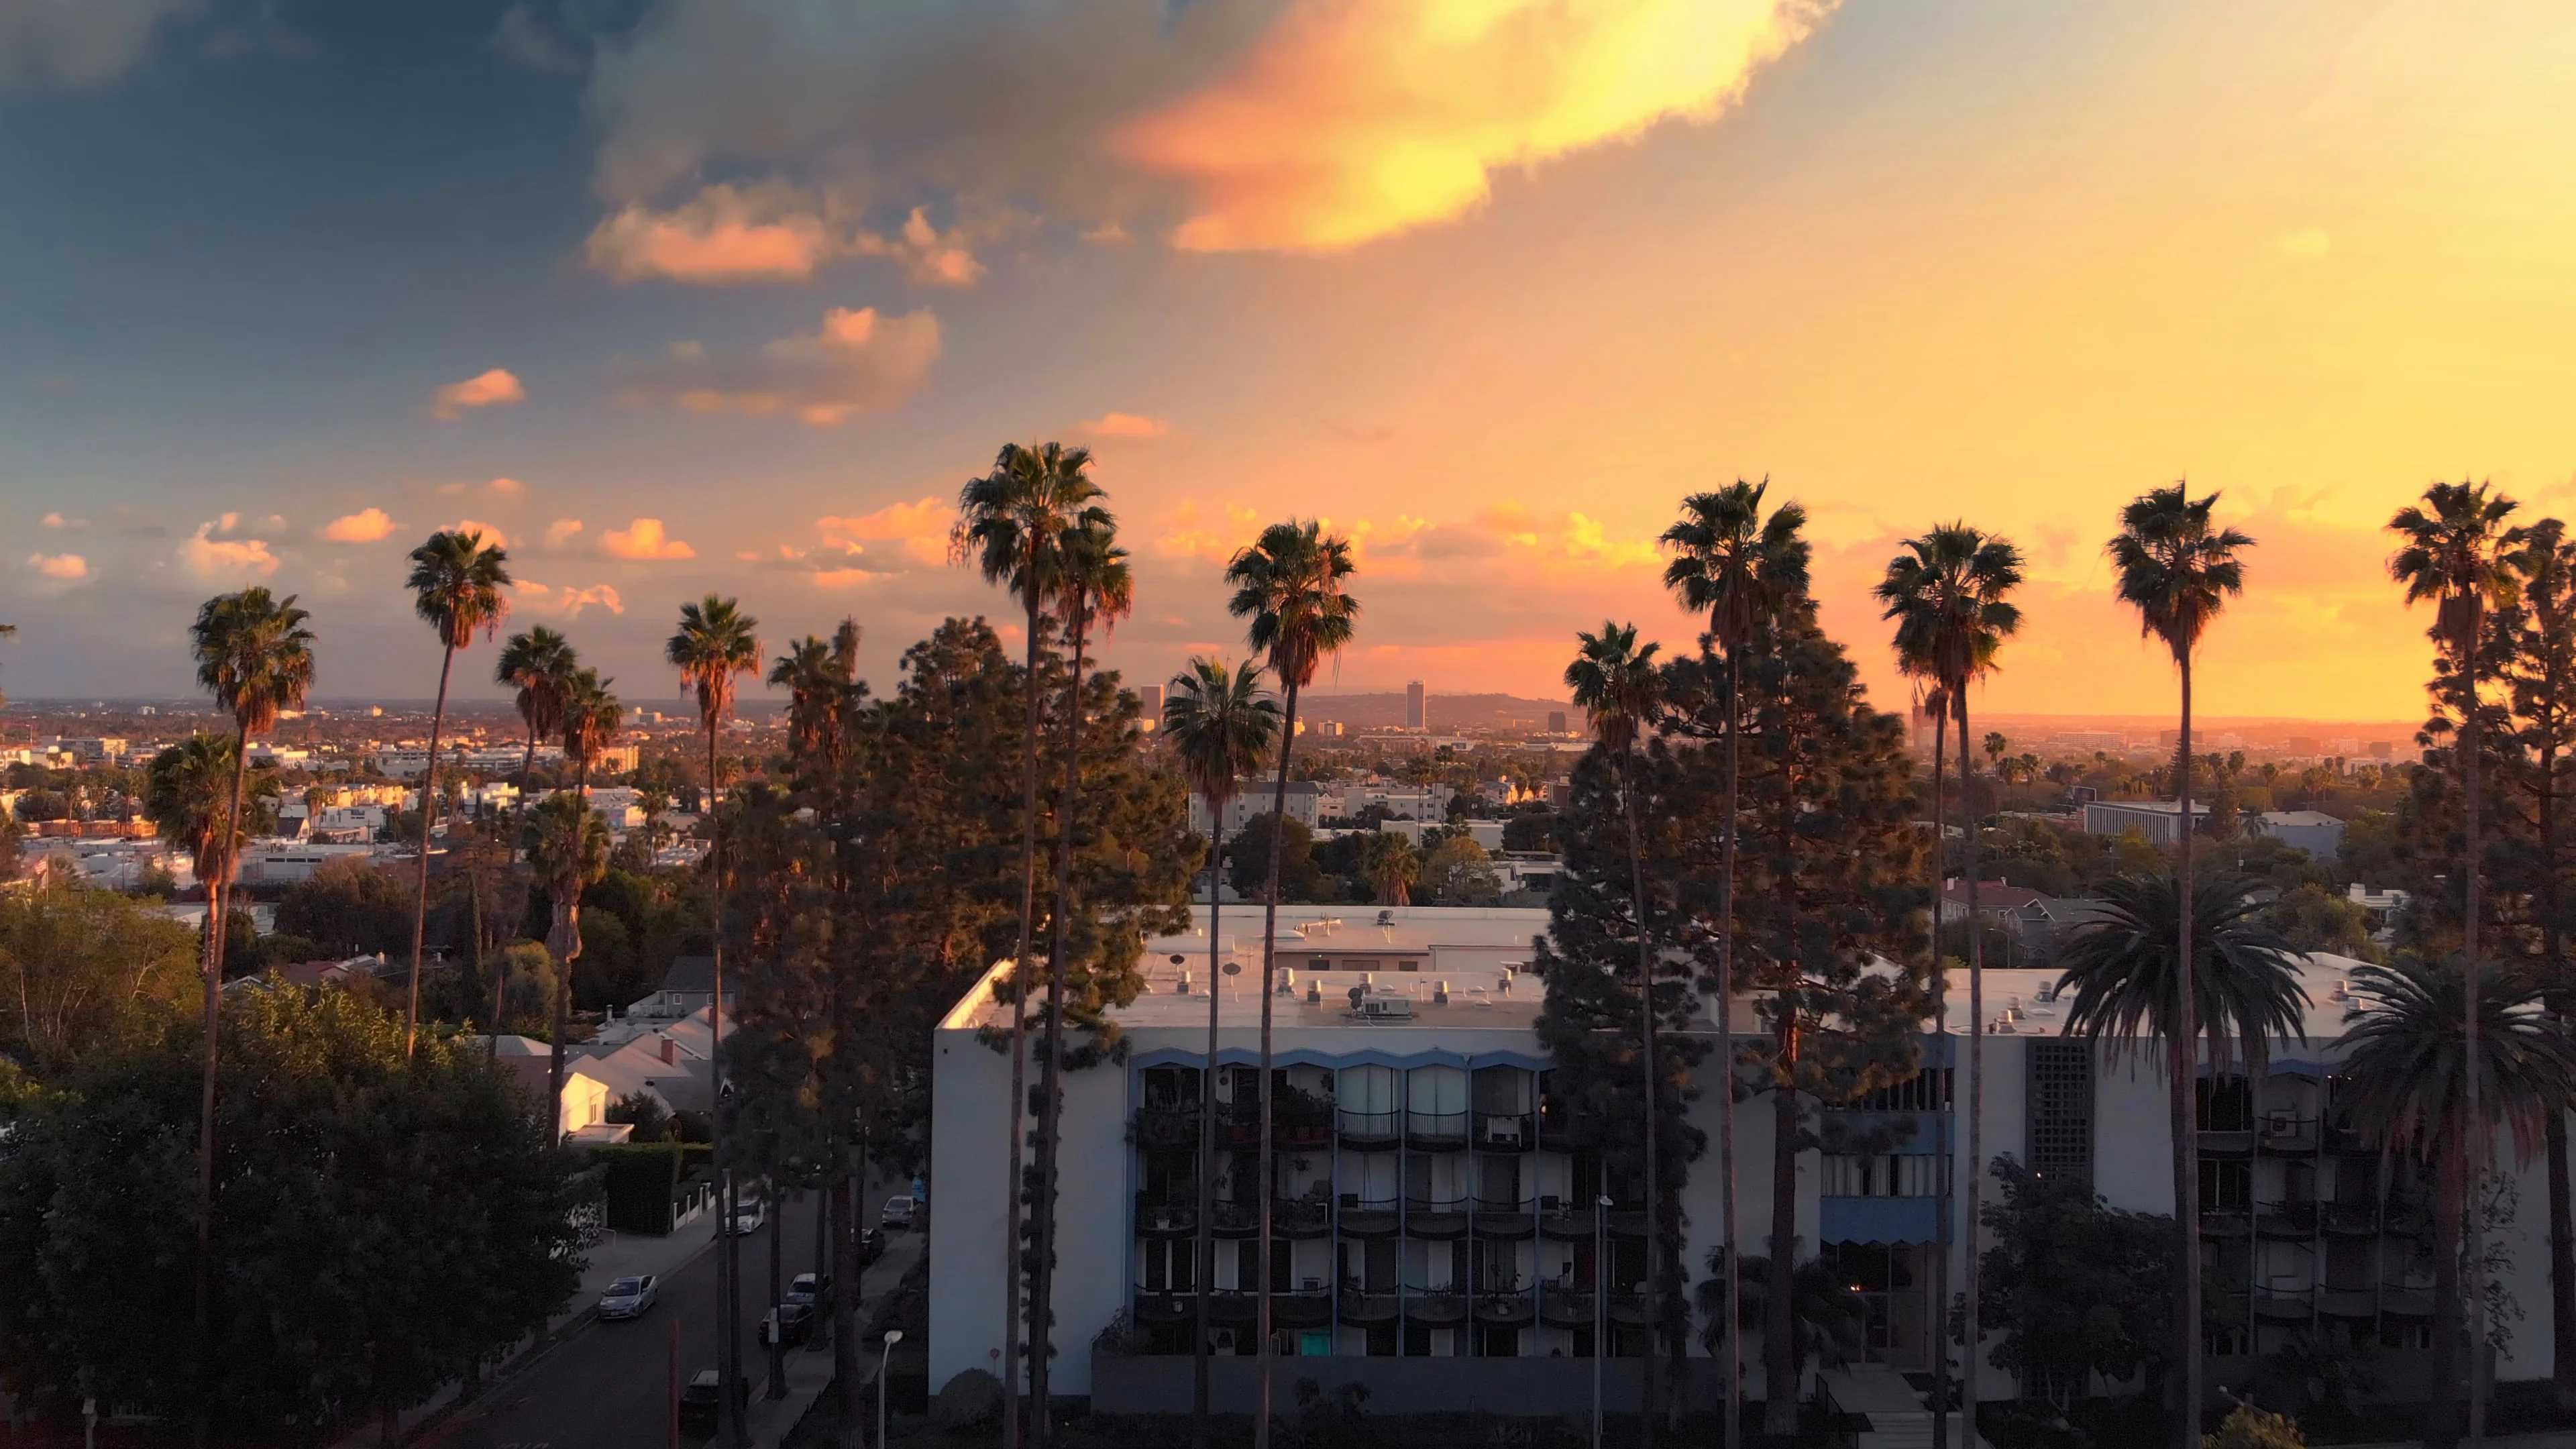 hollywood palm trees sunset